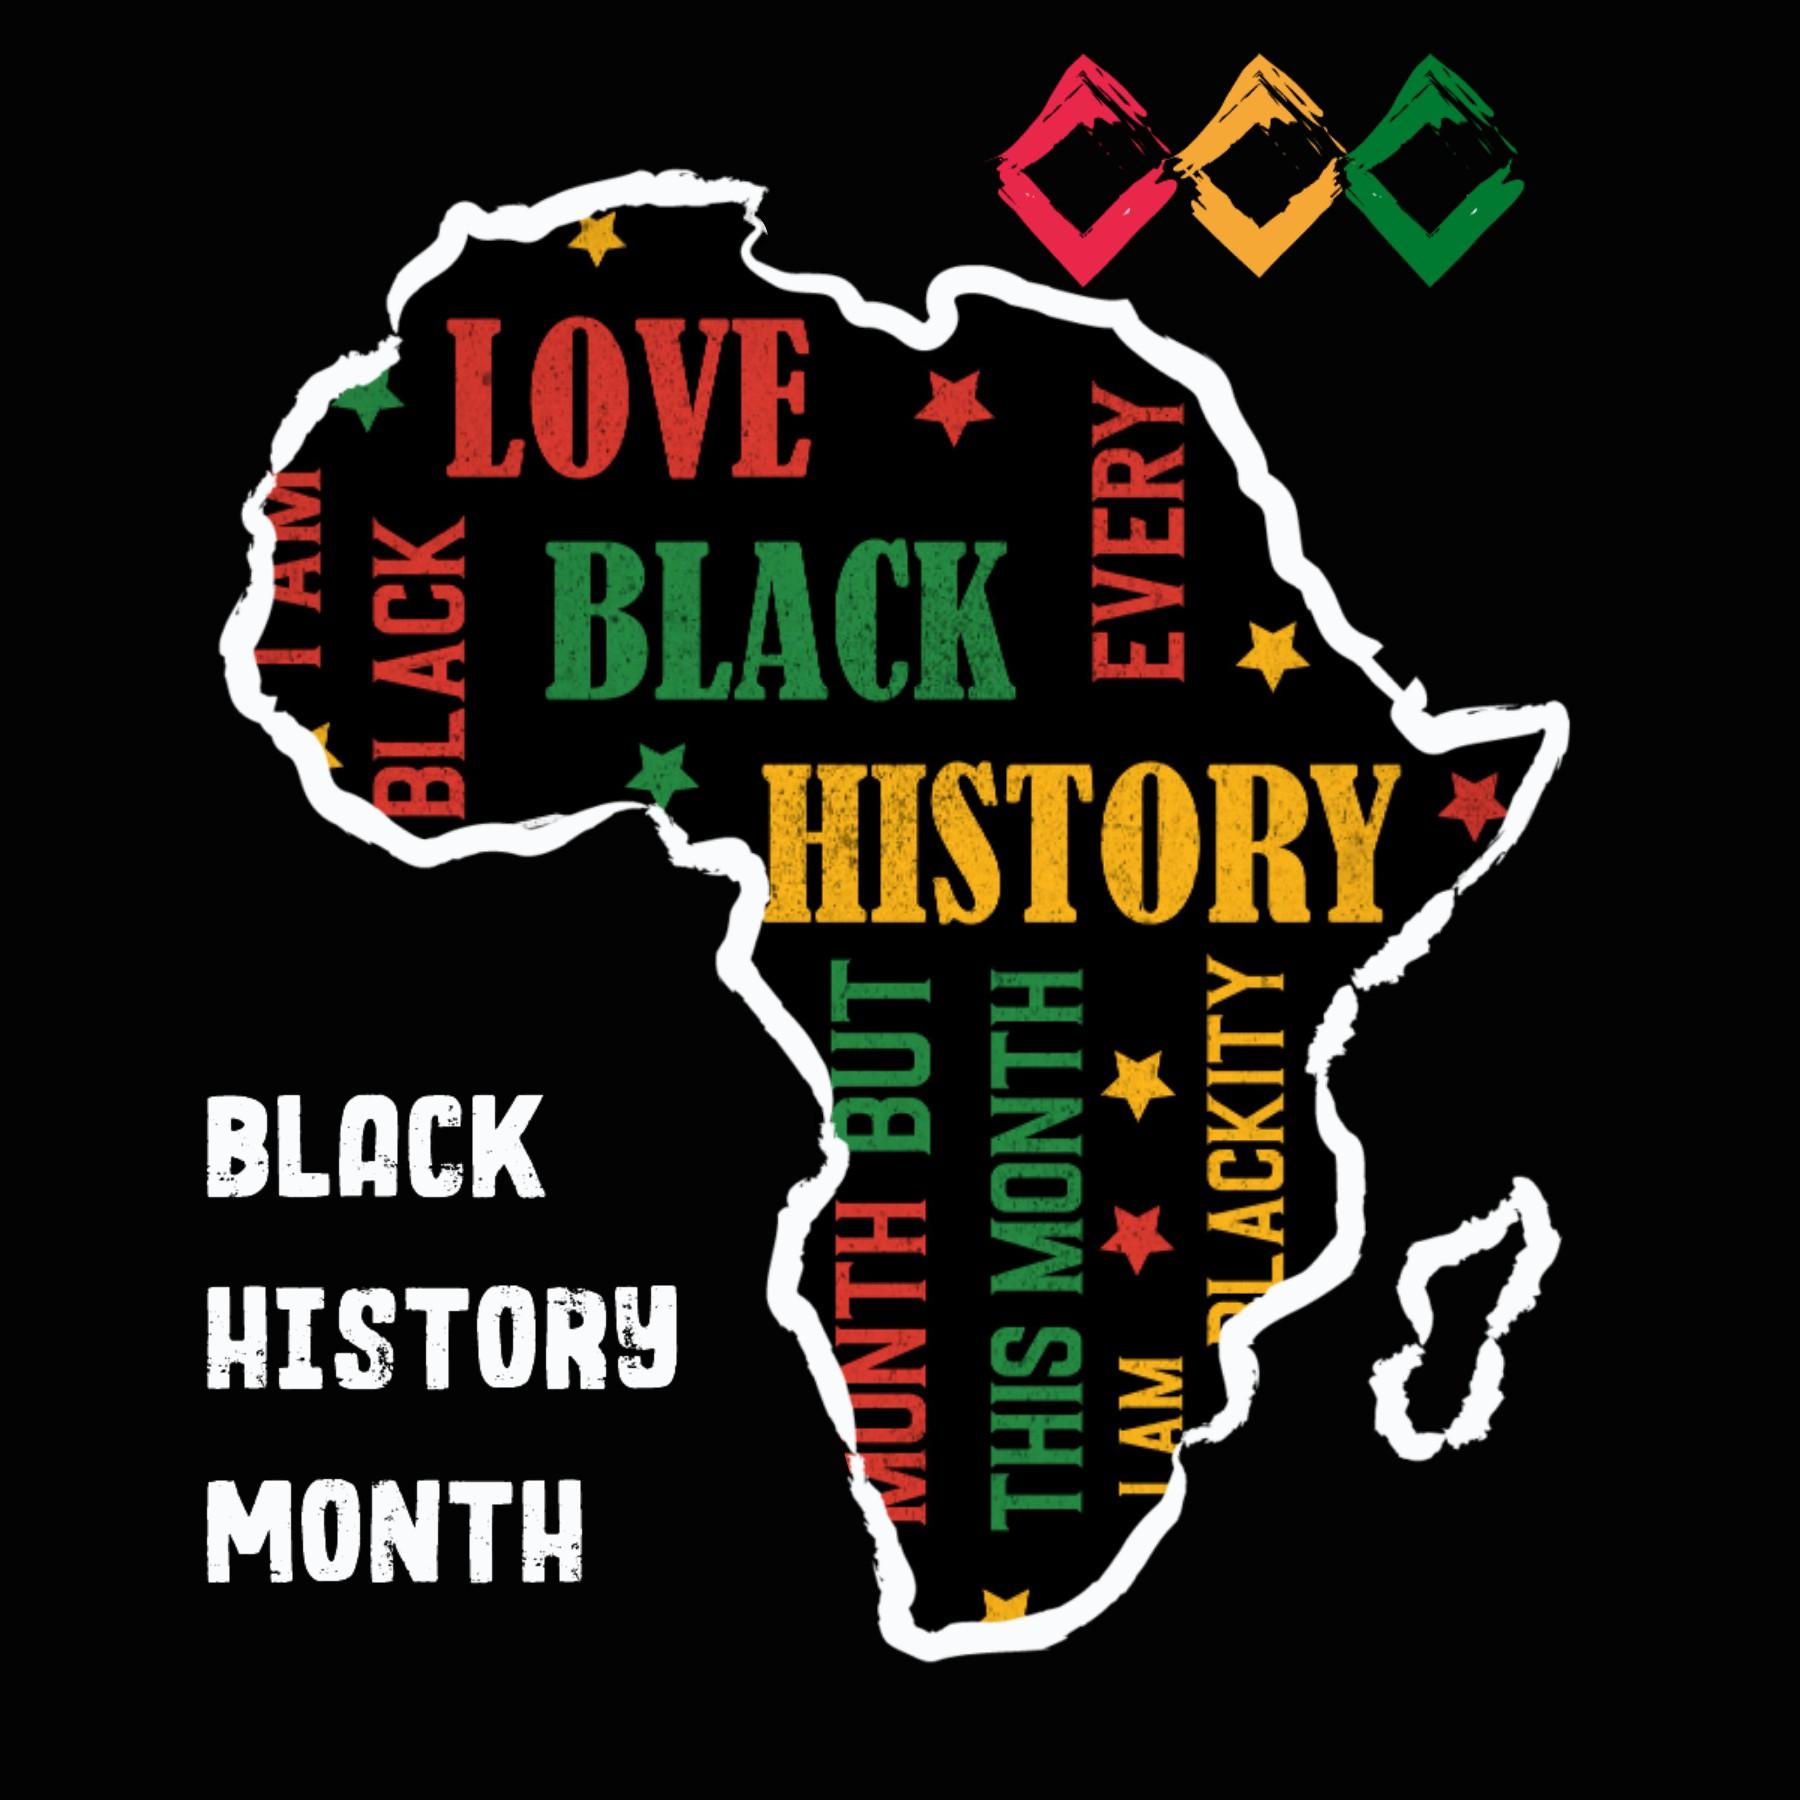 ✊🏾black history month✊🏾
this month we celebrate black history month collage on talking about it coming soon???😱 wait and see- brezzy